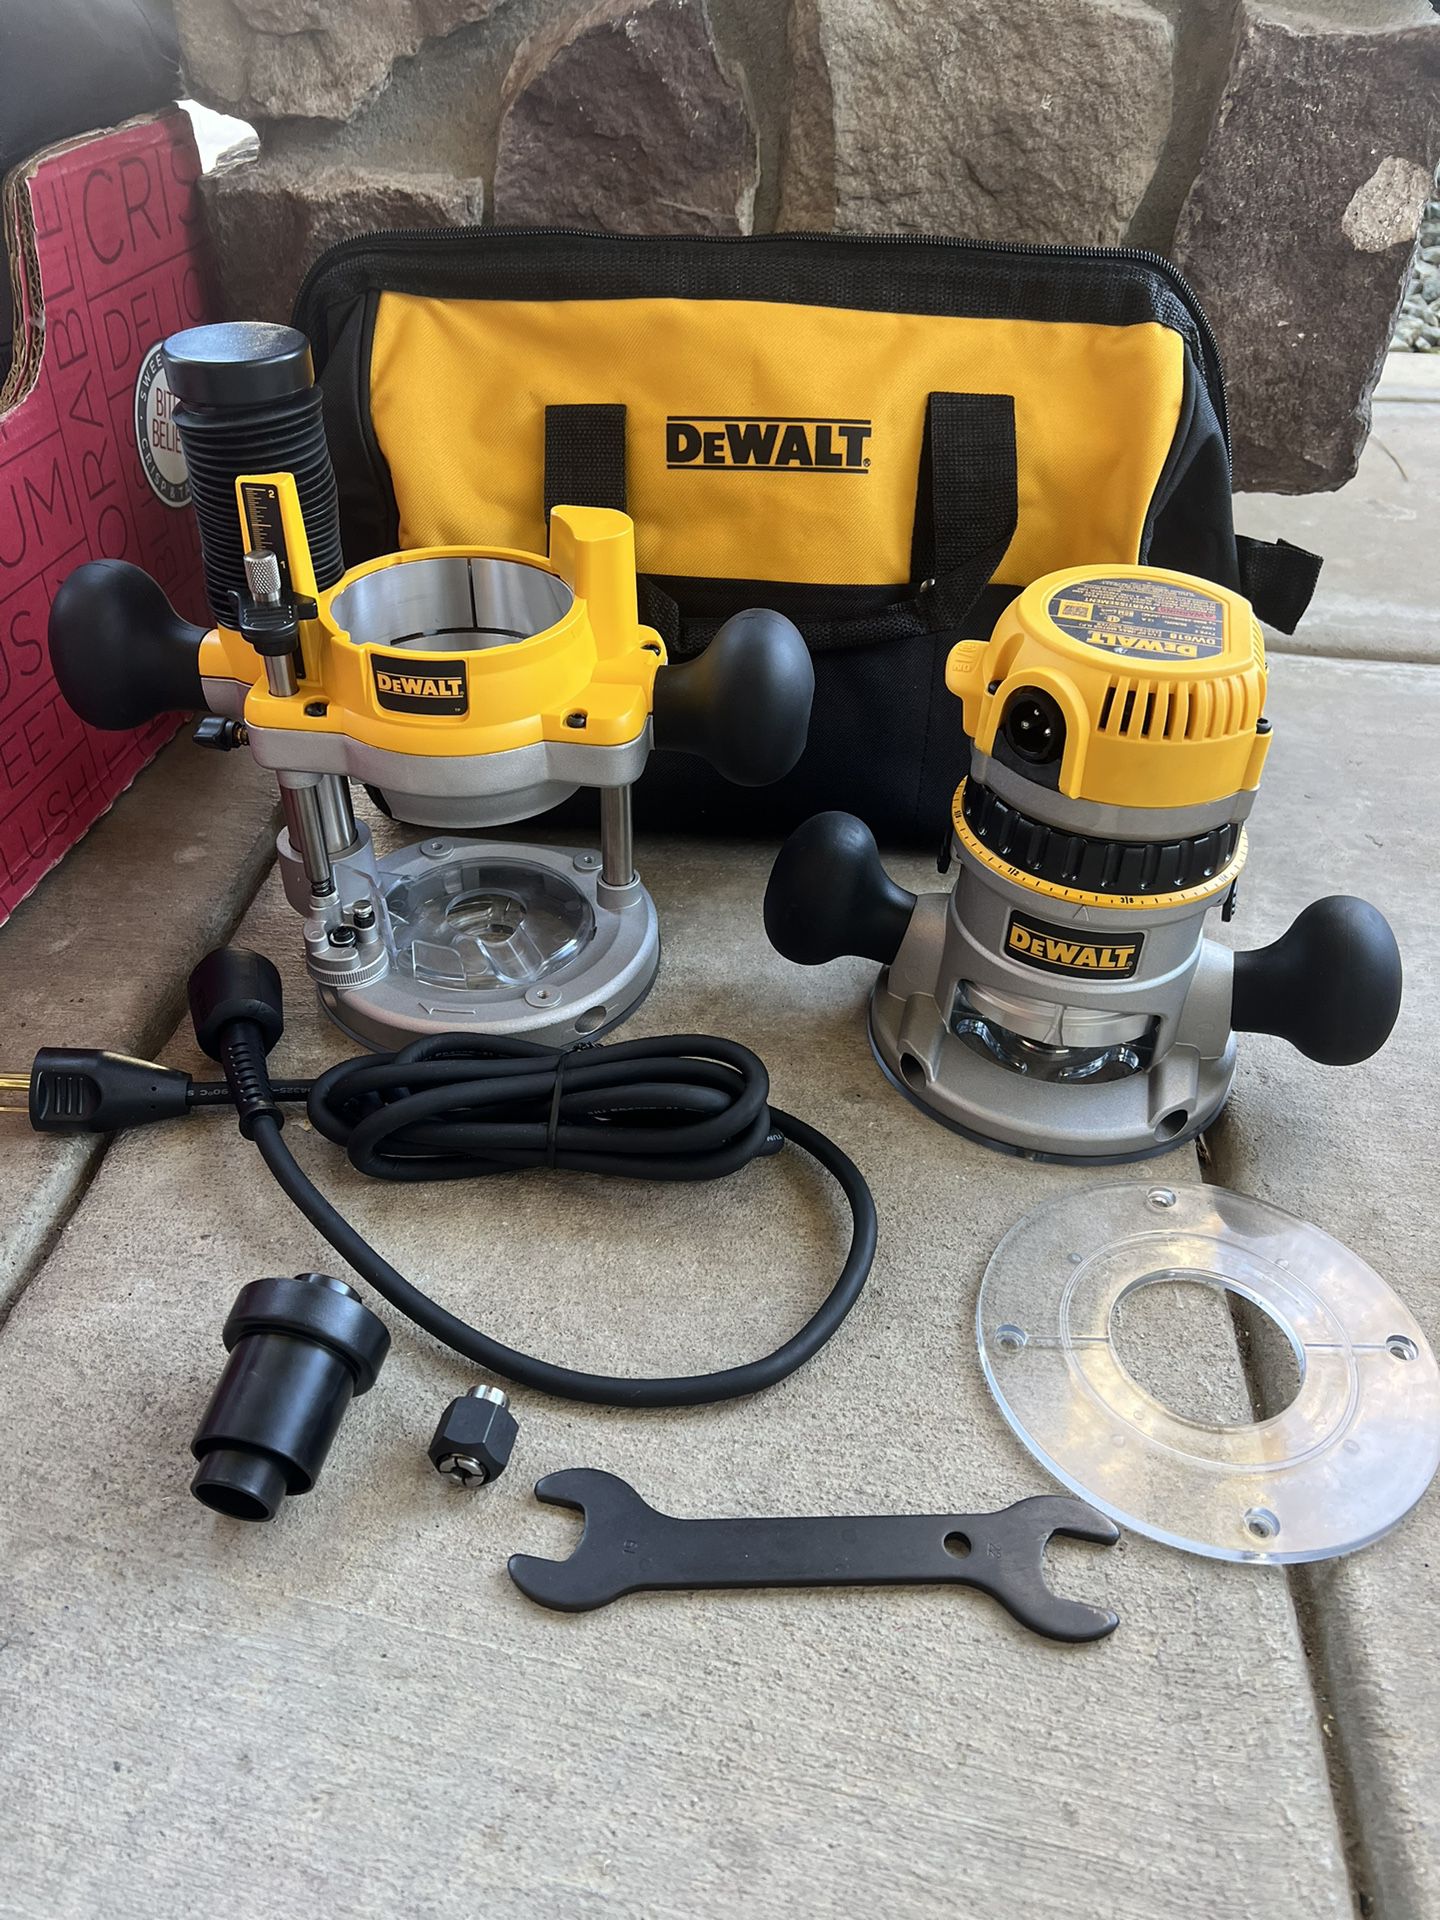 Dewalt DW618PKB 2-14 HP Corded Fixed  Plunge Base Router Combo Kit New for  Sale in Riverbank, CA OfferUp